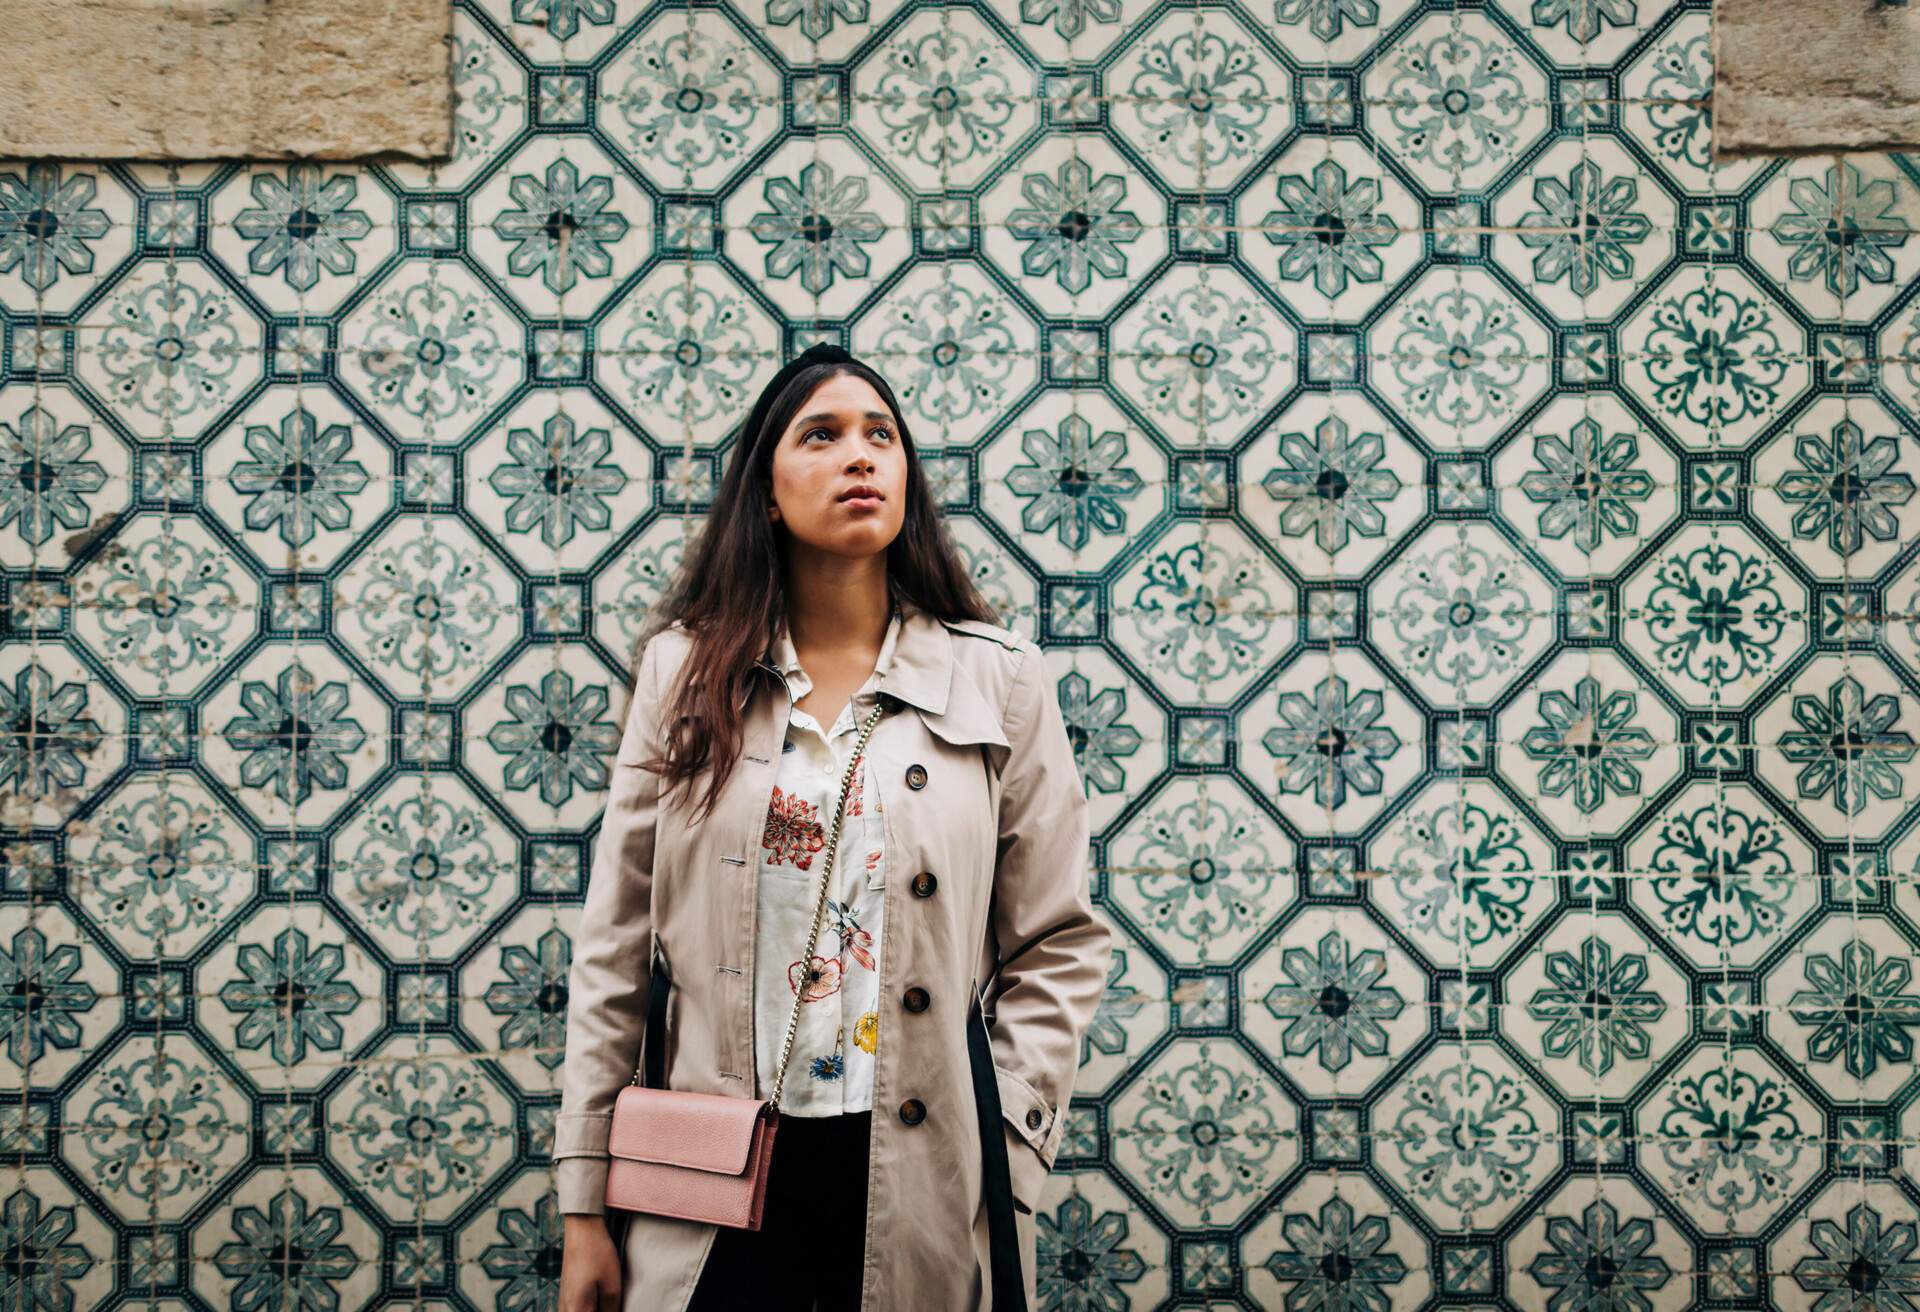 A beautiful woman in casual wear stands at a wall adorned with stylish tiles.